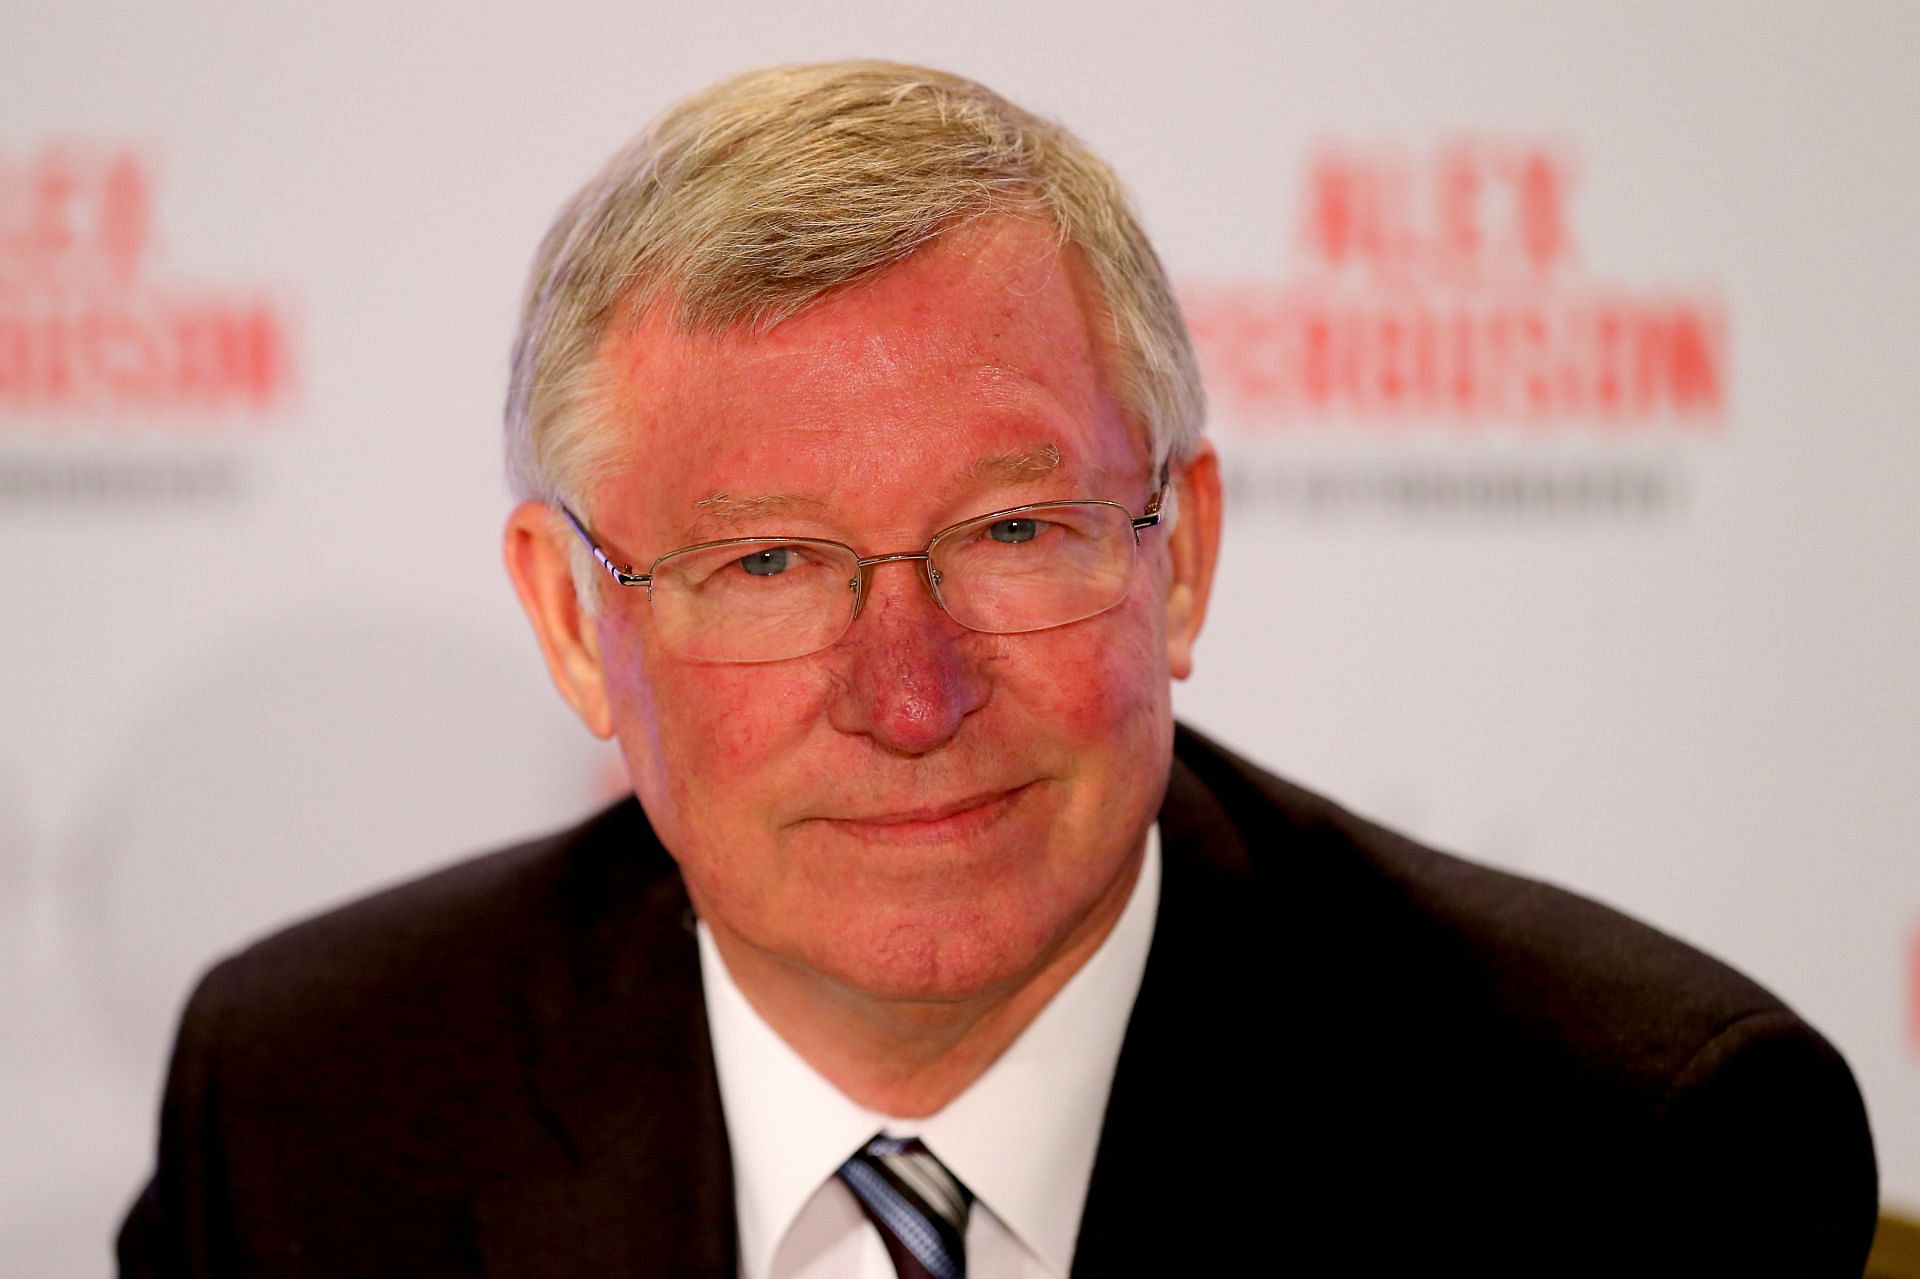 Sir Alex Ferguson during his book signing event